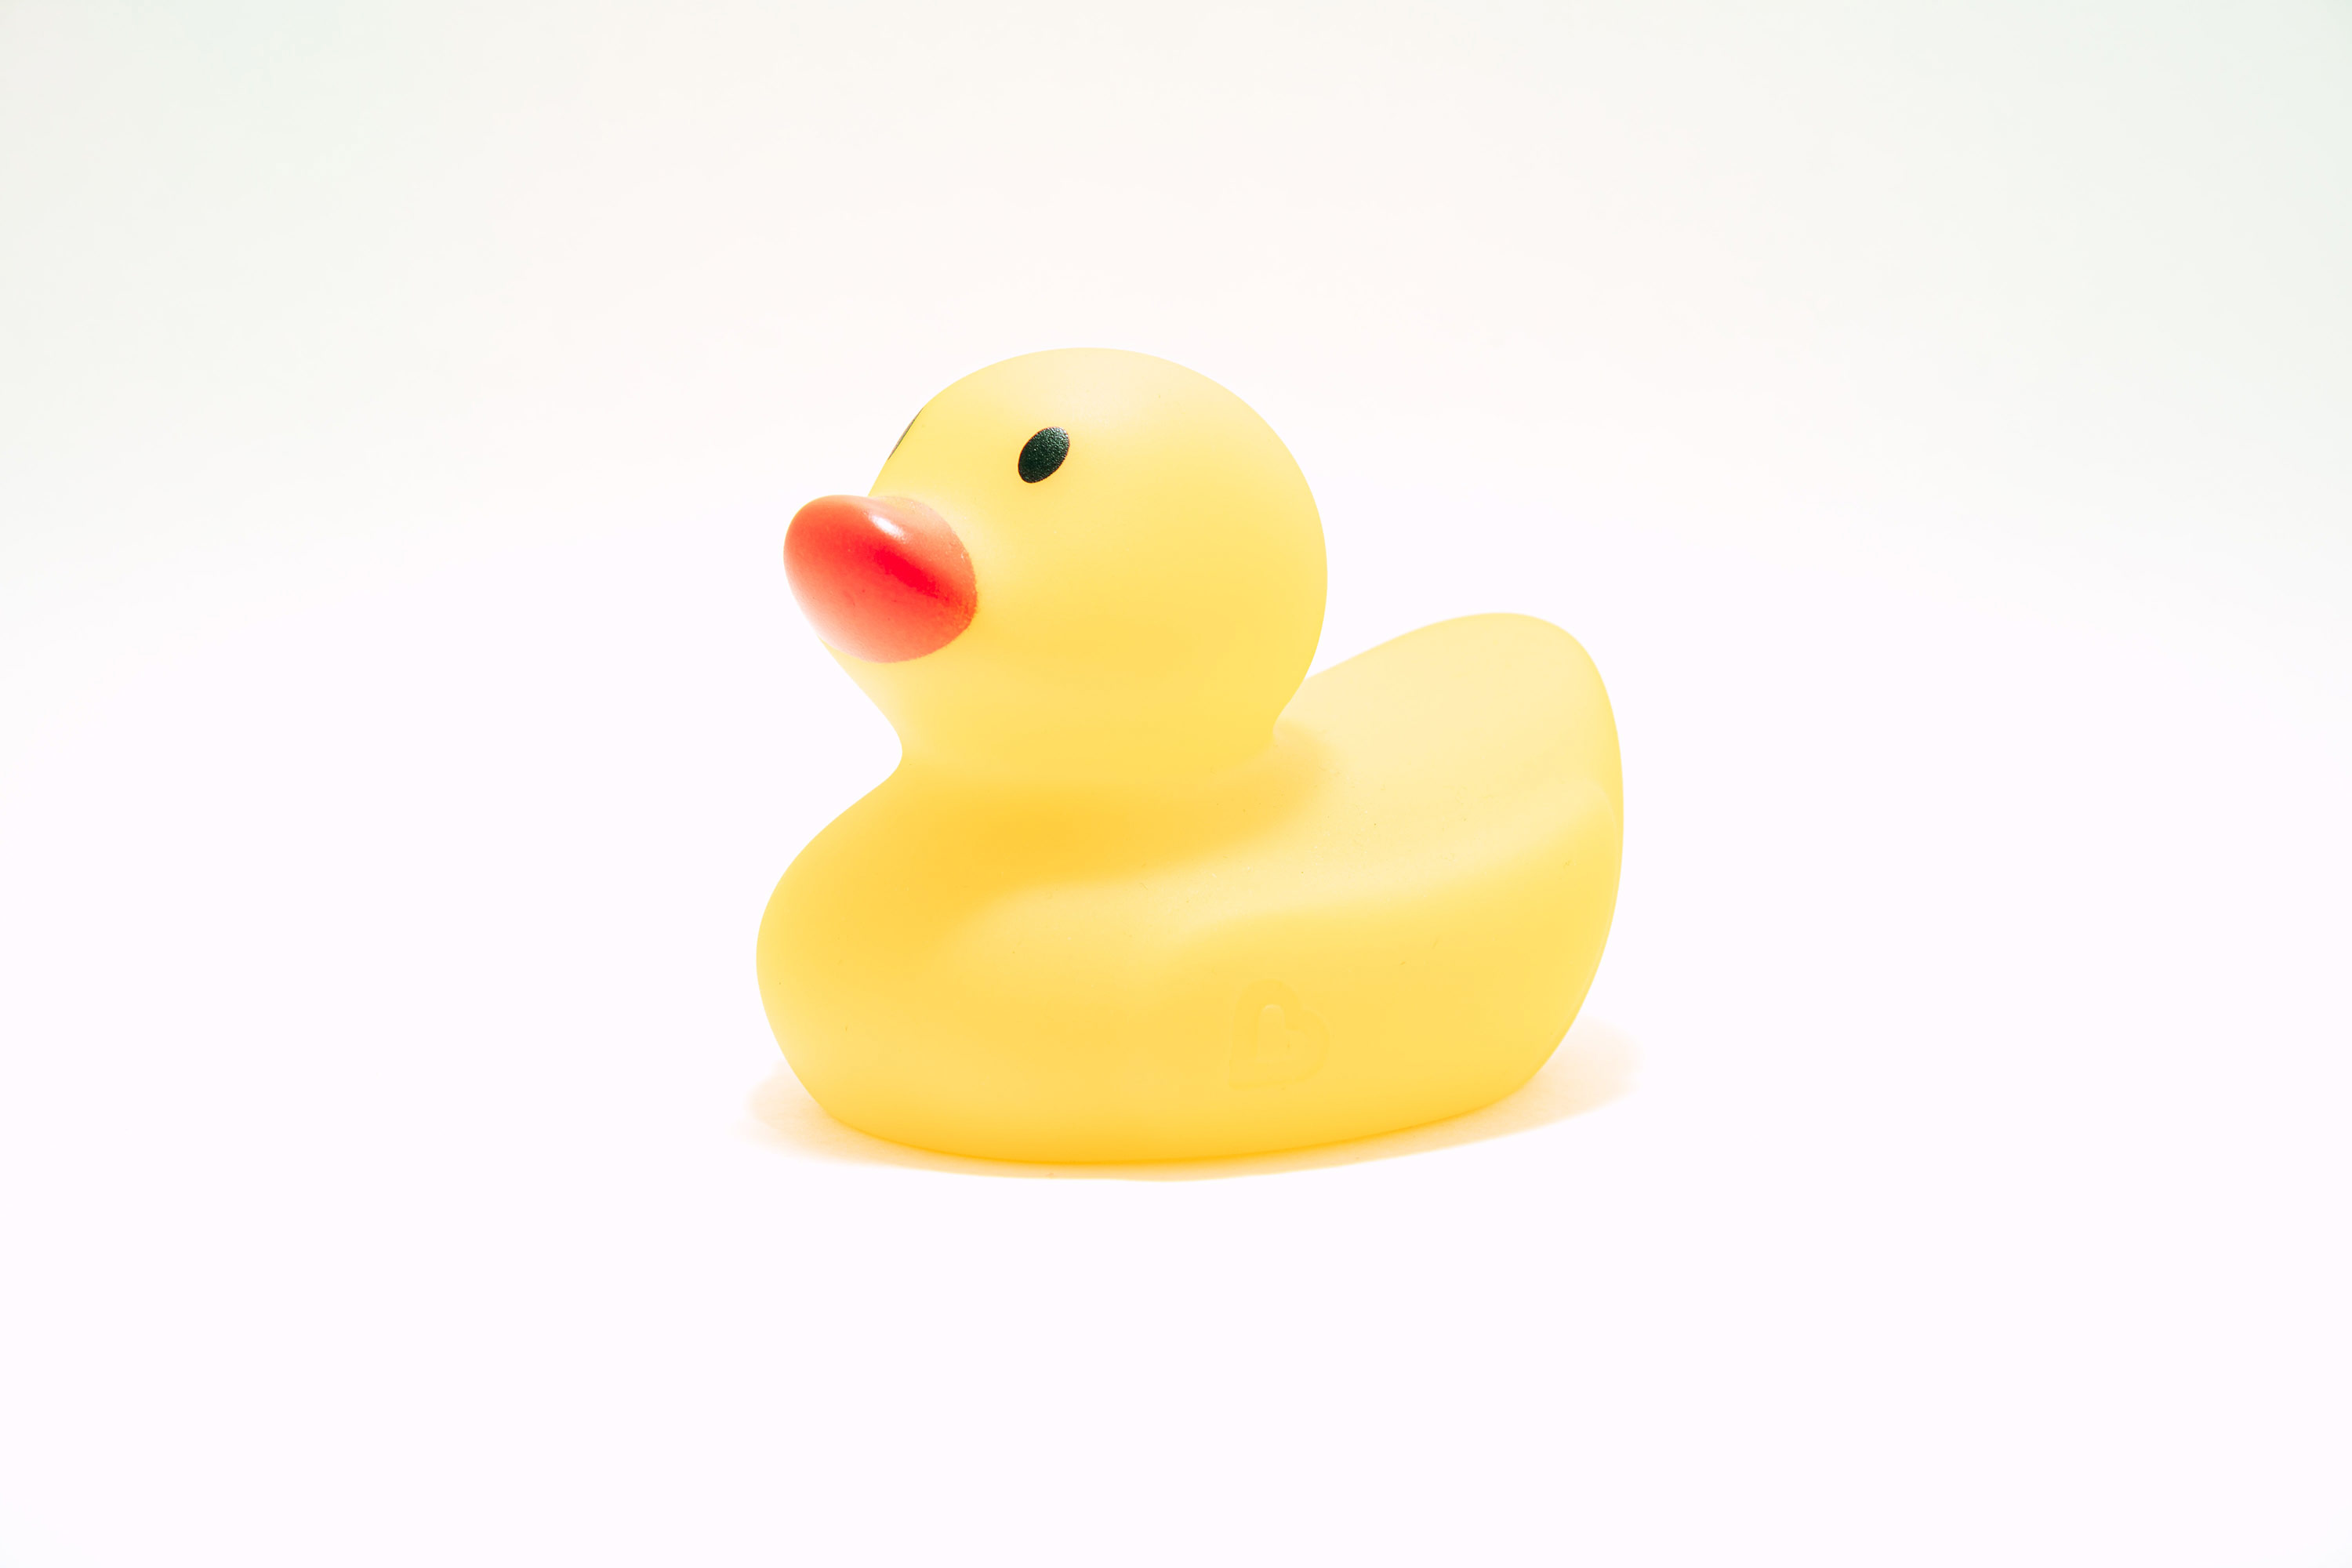 Having "rubber duck" sessions to think through ideas